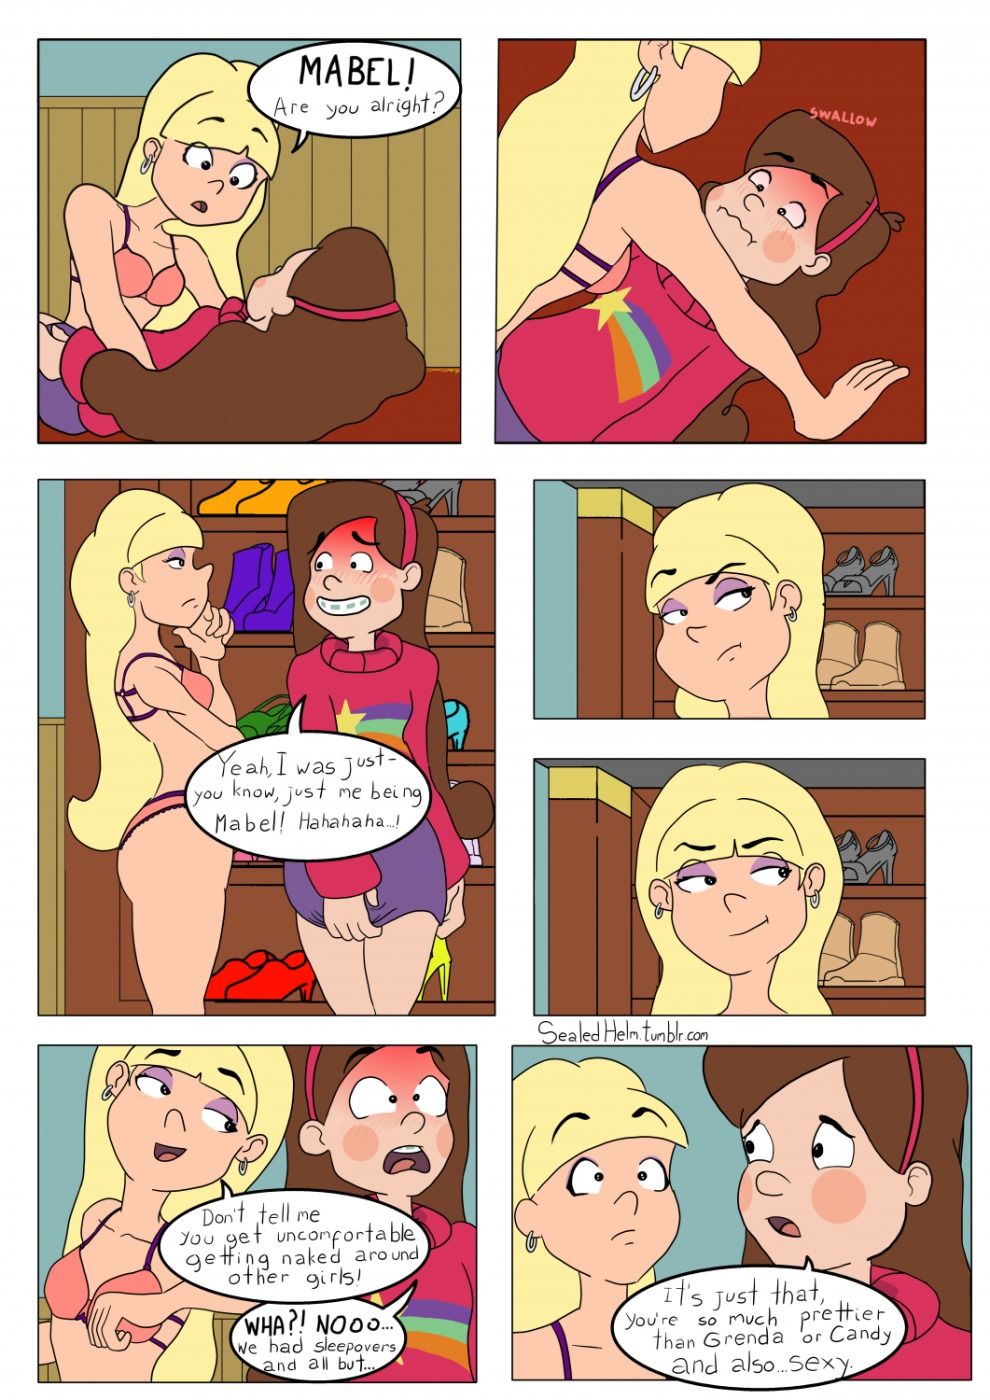 [Sealedhelm] Gravity Falls - Mabel x Pacifica page 2